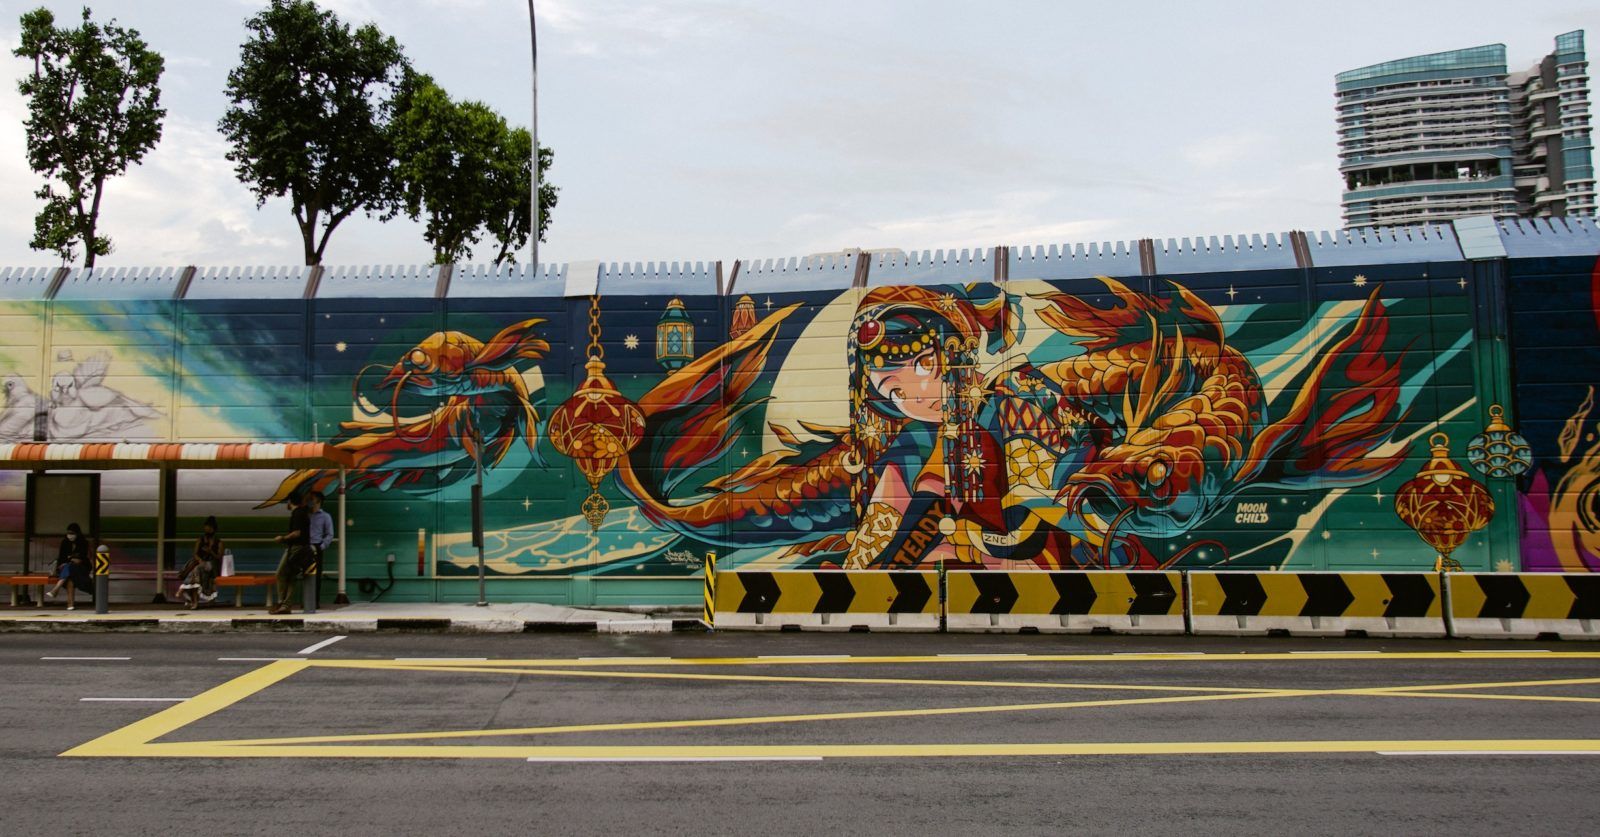 State of Art: Singapore’s first graffiti Hall of Fame, a Cheong Soo Pieng retrospective, and more